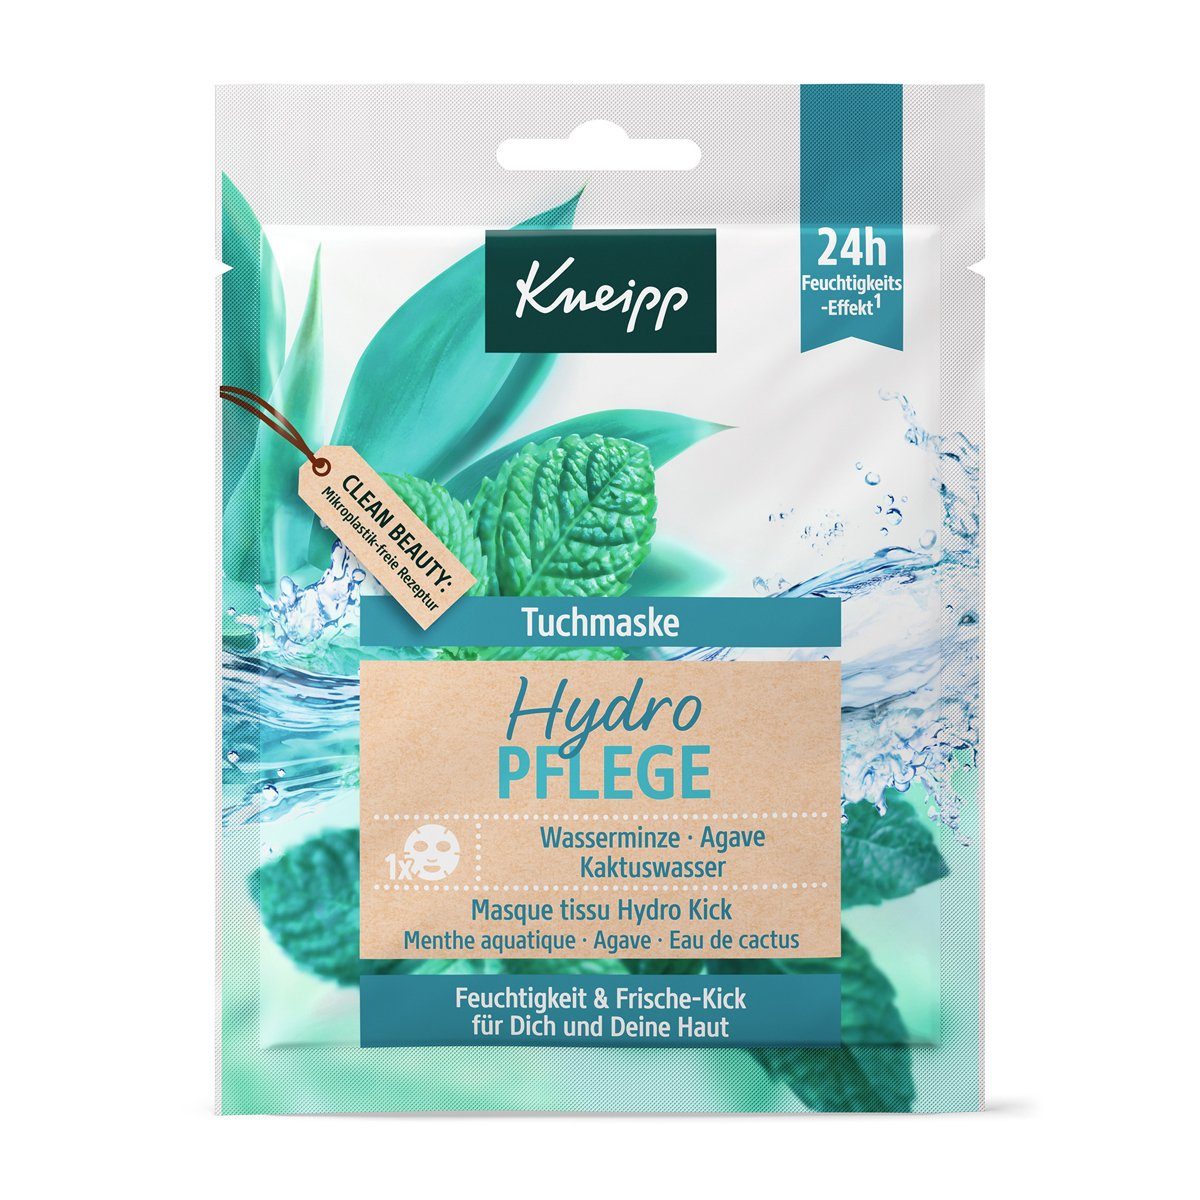 Kneipp Gesichtsemulsion | Tagescremes